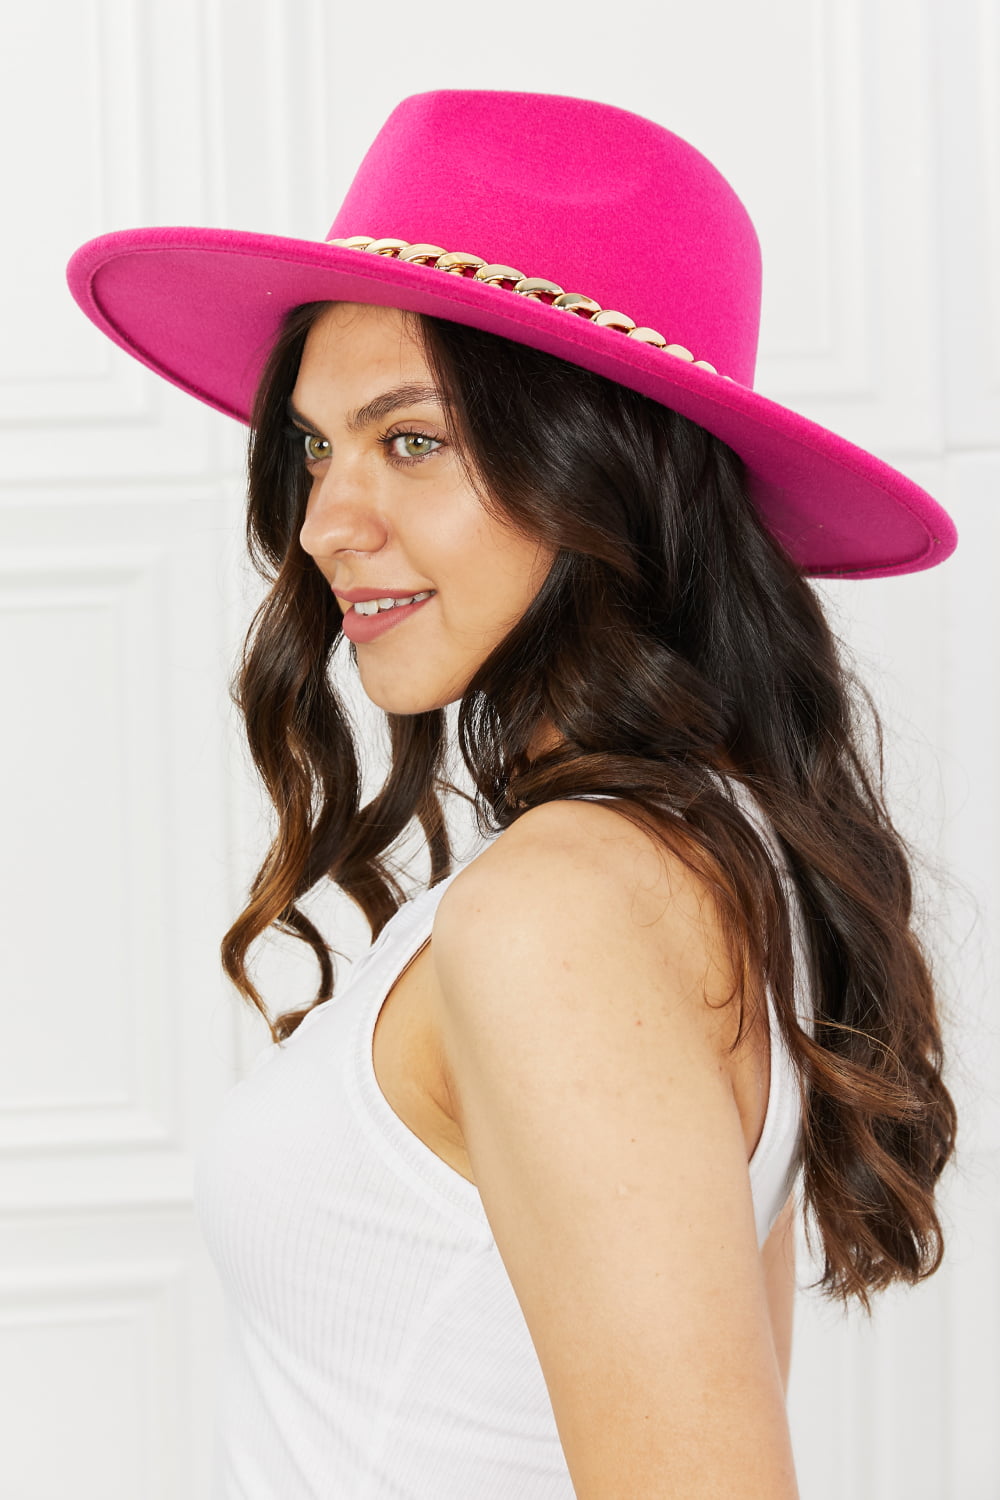 Fame Keep Your Promise Fedora Hat in Pink- ONLINE ONLY 2-10 DAY SHIPPING